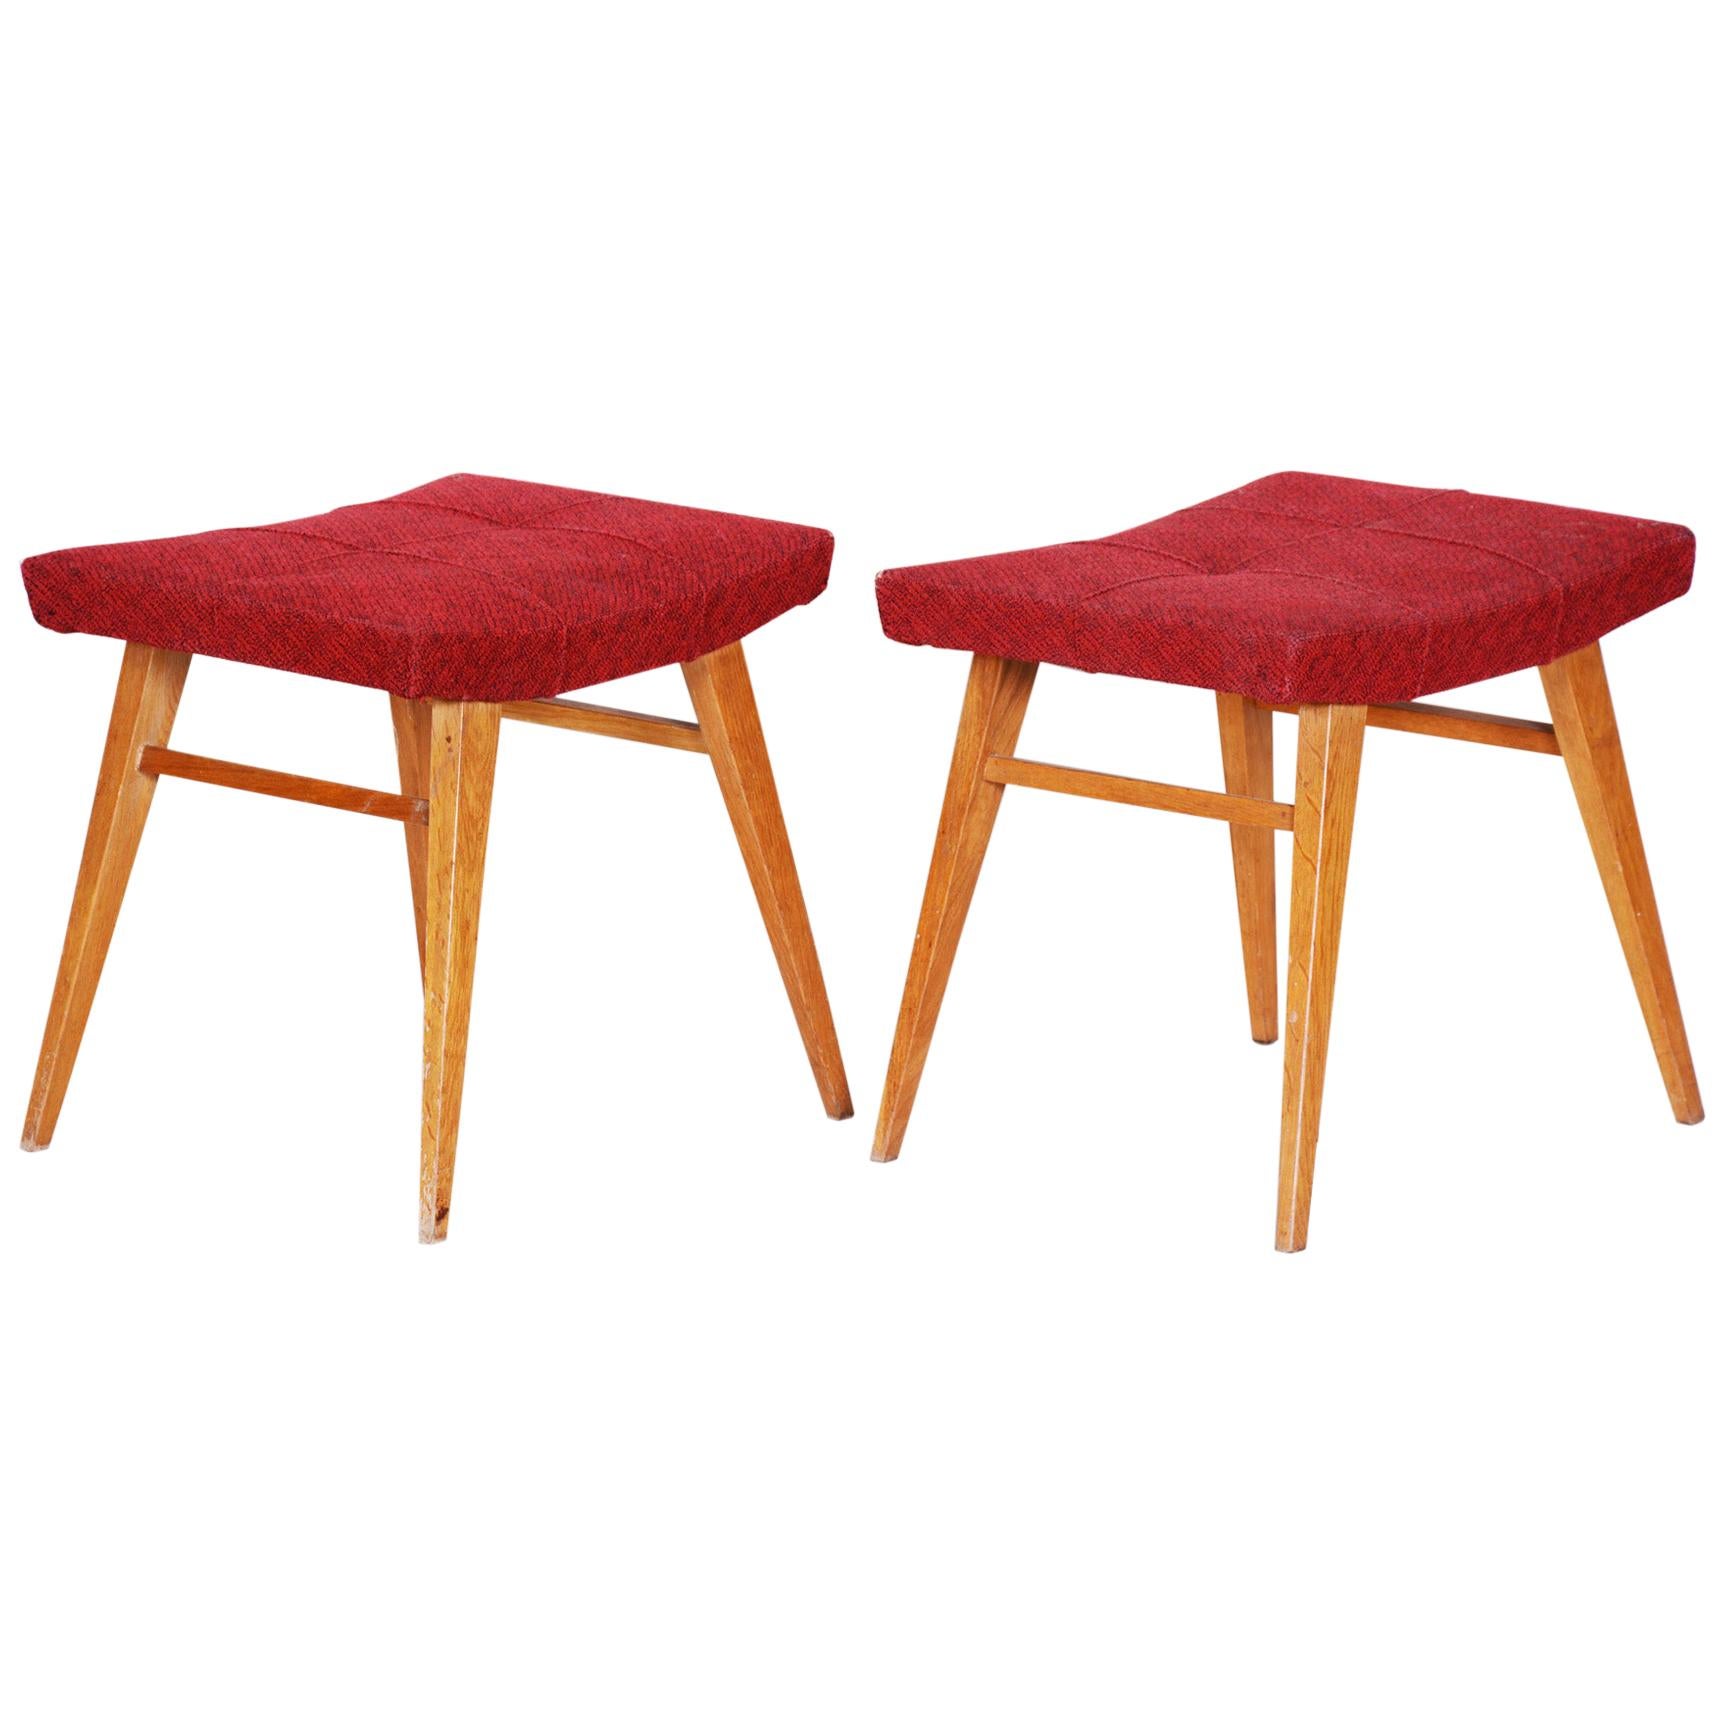 Pair of Midcentury Red Beech Stools, 1960s, Original Preserved Condition